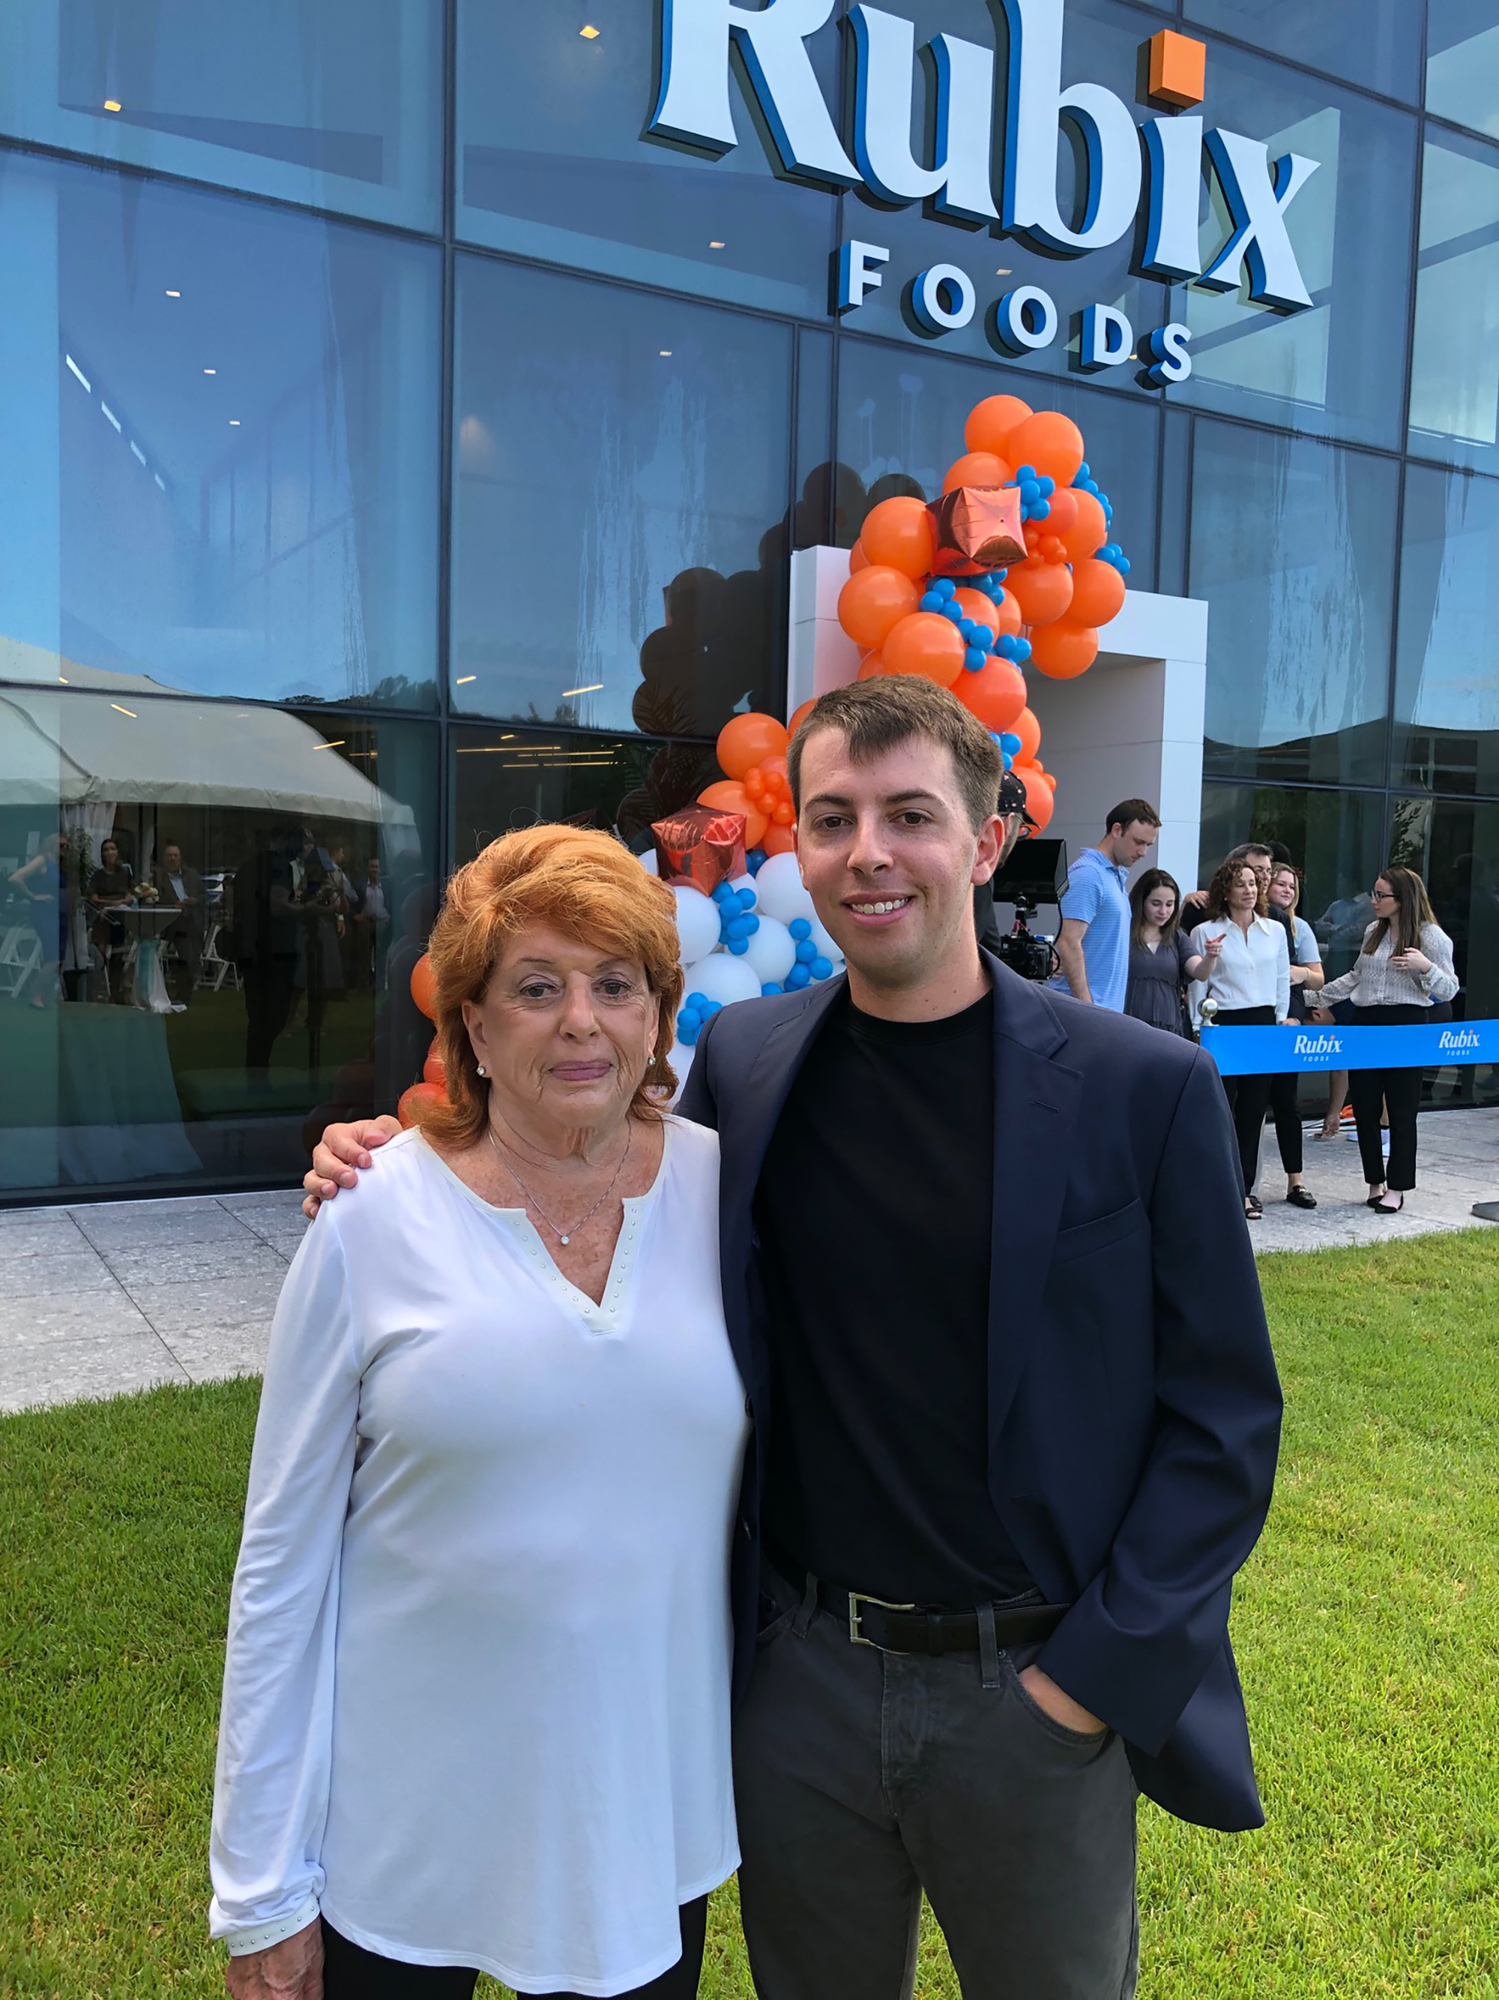 Justin Block with his grandmother, Beverly Block. Justin Block's dad is CEO Andy Block. (Photo by Karen Brune Mathis)